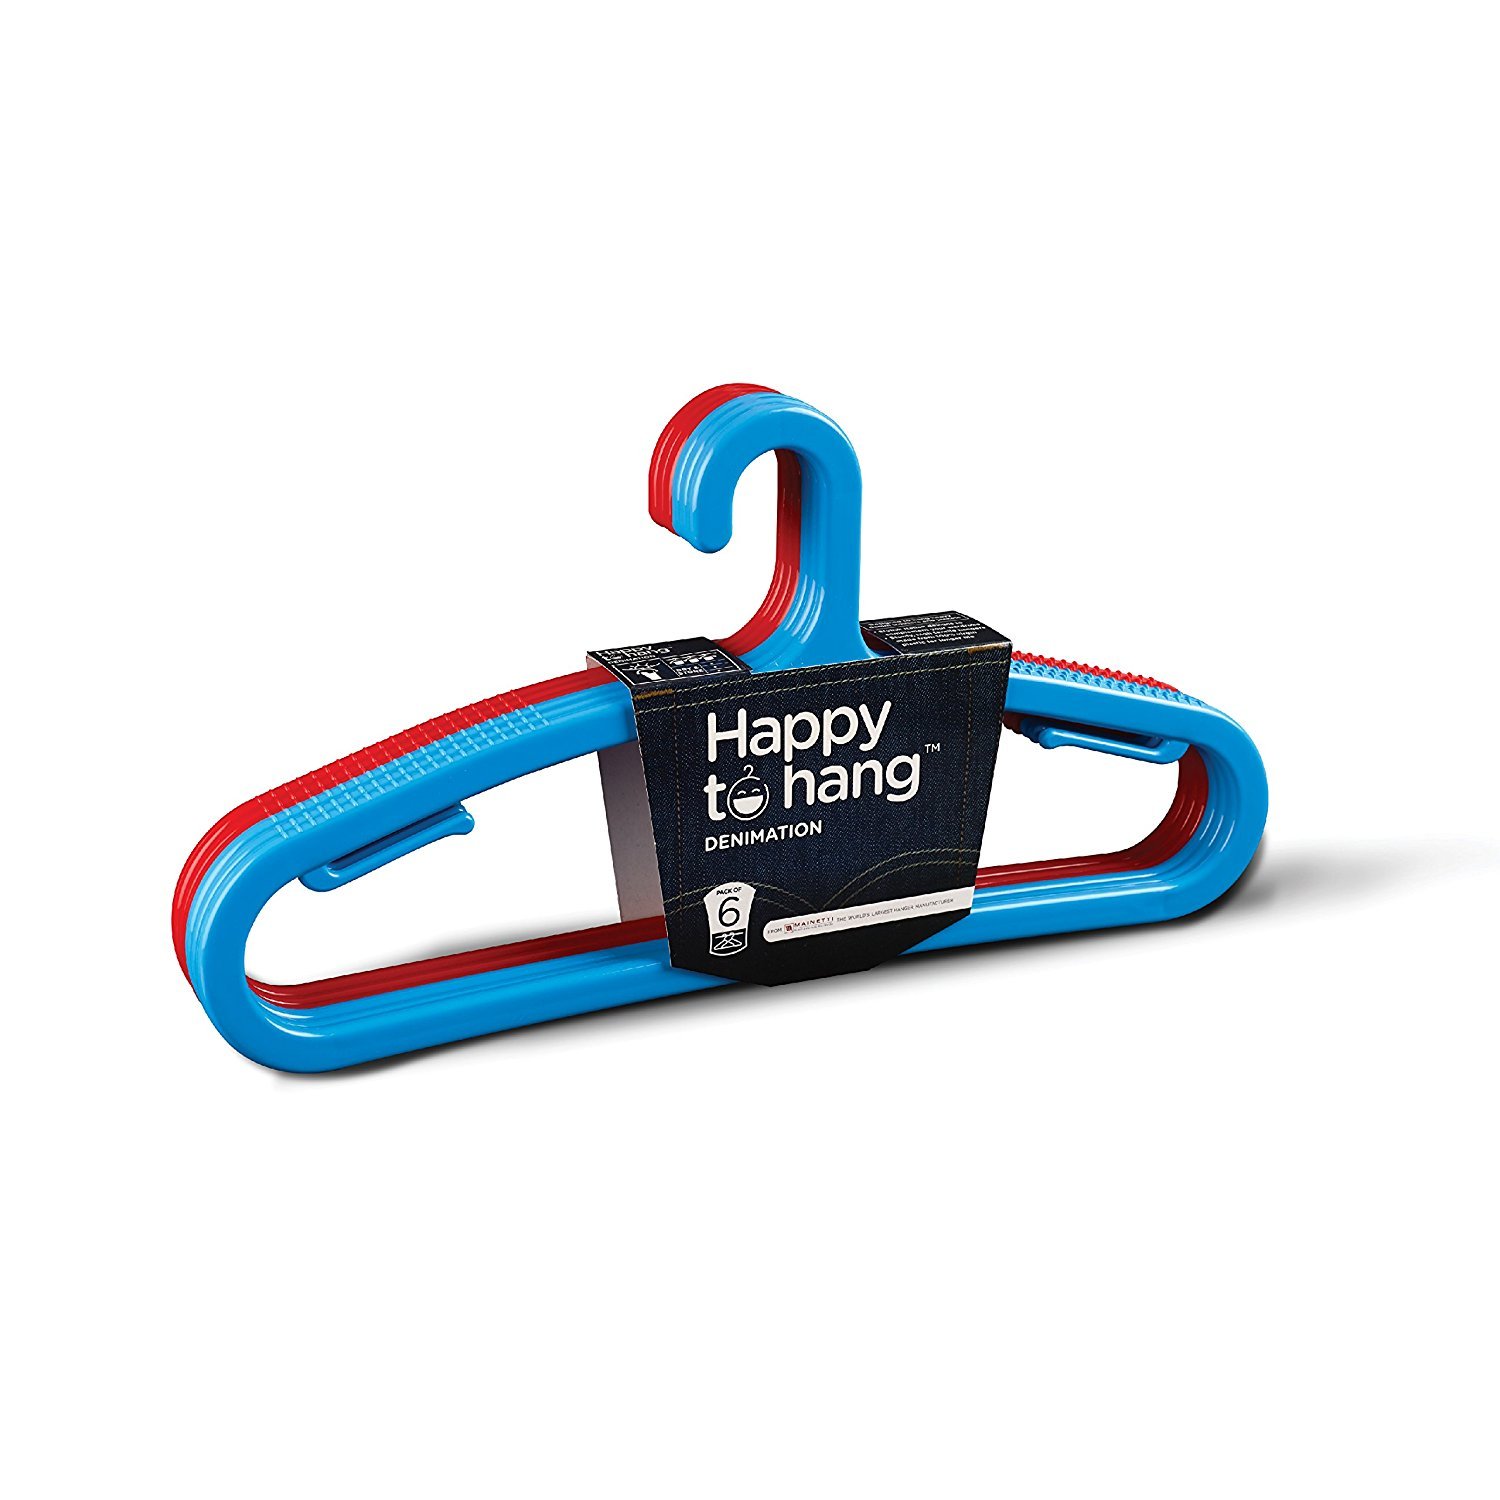 Happy-To-Hang-Denimation-6-Piece-Polypropylene-Hanger,-Blue-and-Red